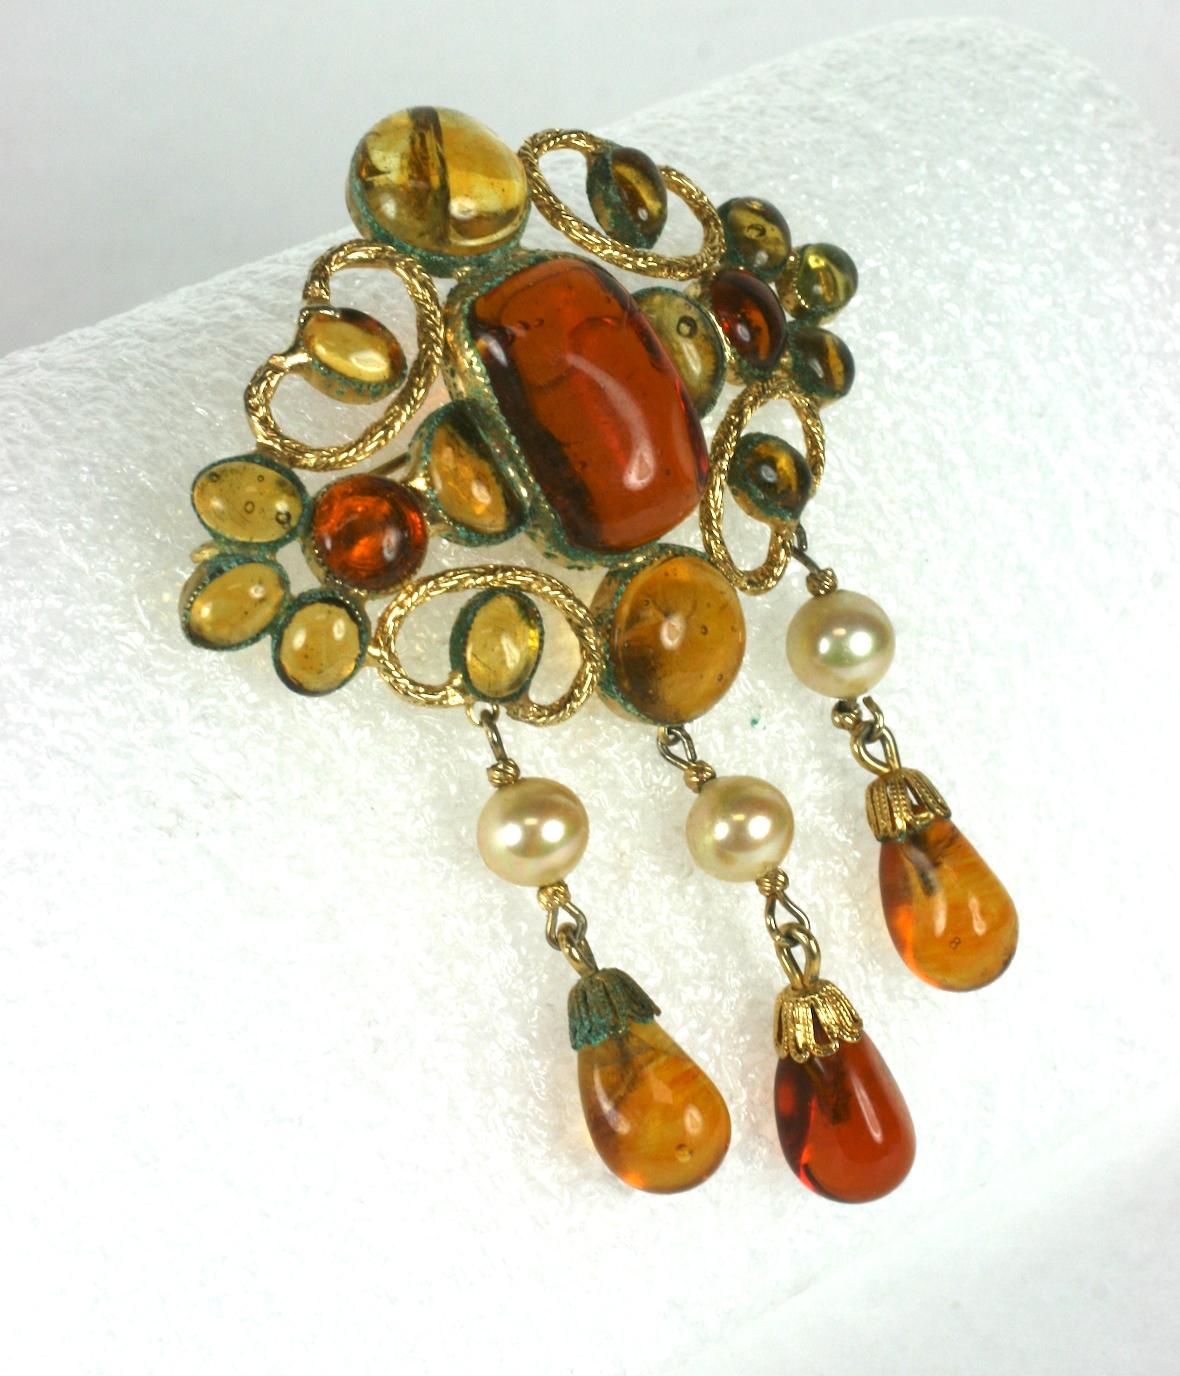 Elaborate De Nicola Citrine and Topaz made by Gripoix, Paris brooch of 2 tones of citrine poured glass with faux pearls and dangling drops. Many manufacturers contracted pieces from the Gripoix, Paris factory as they could not produce the hand made